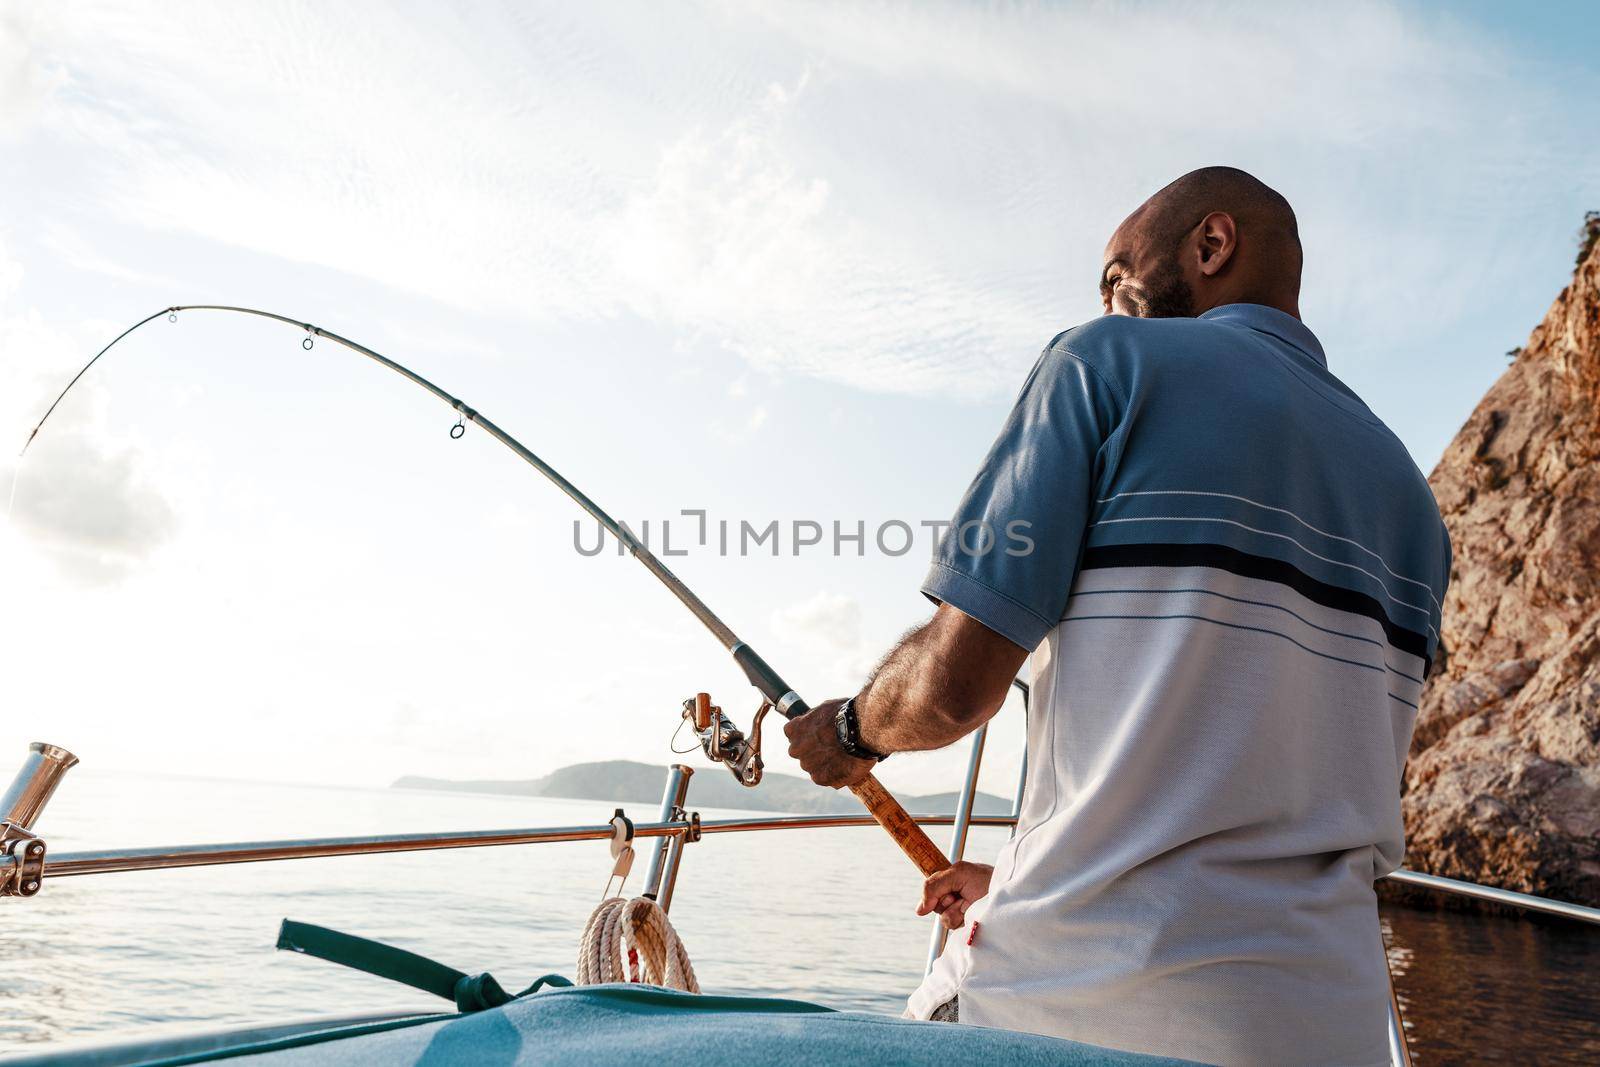 Young african american man standing with fishing rod on a sailboat fishing in open sea on sunset, close up